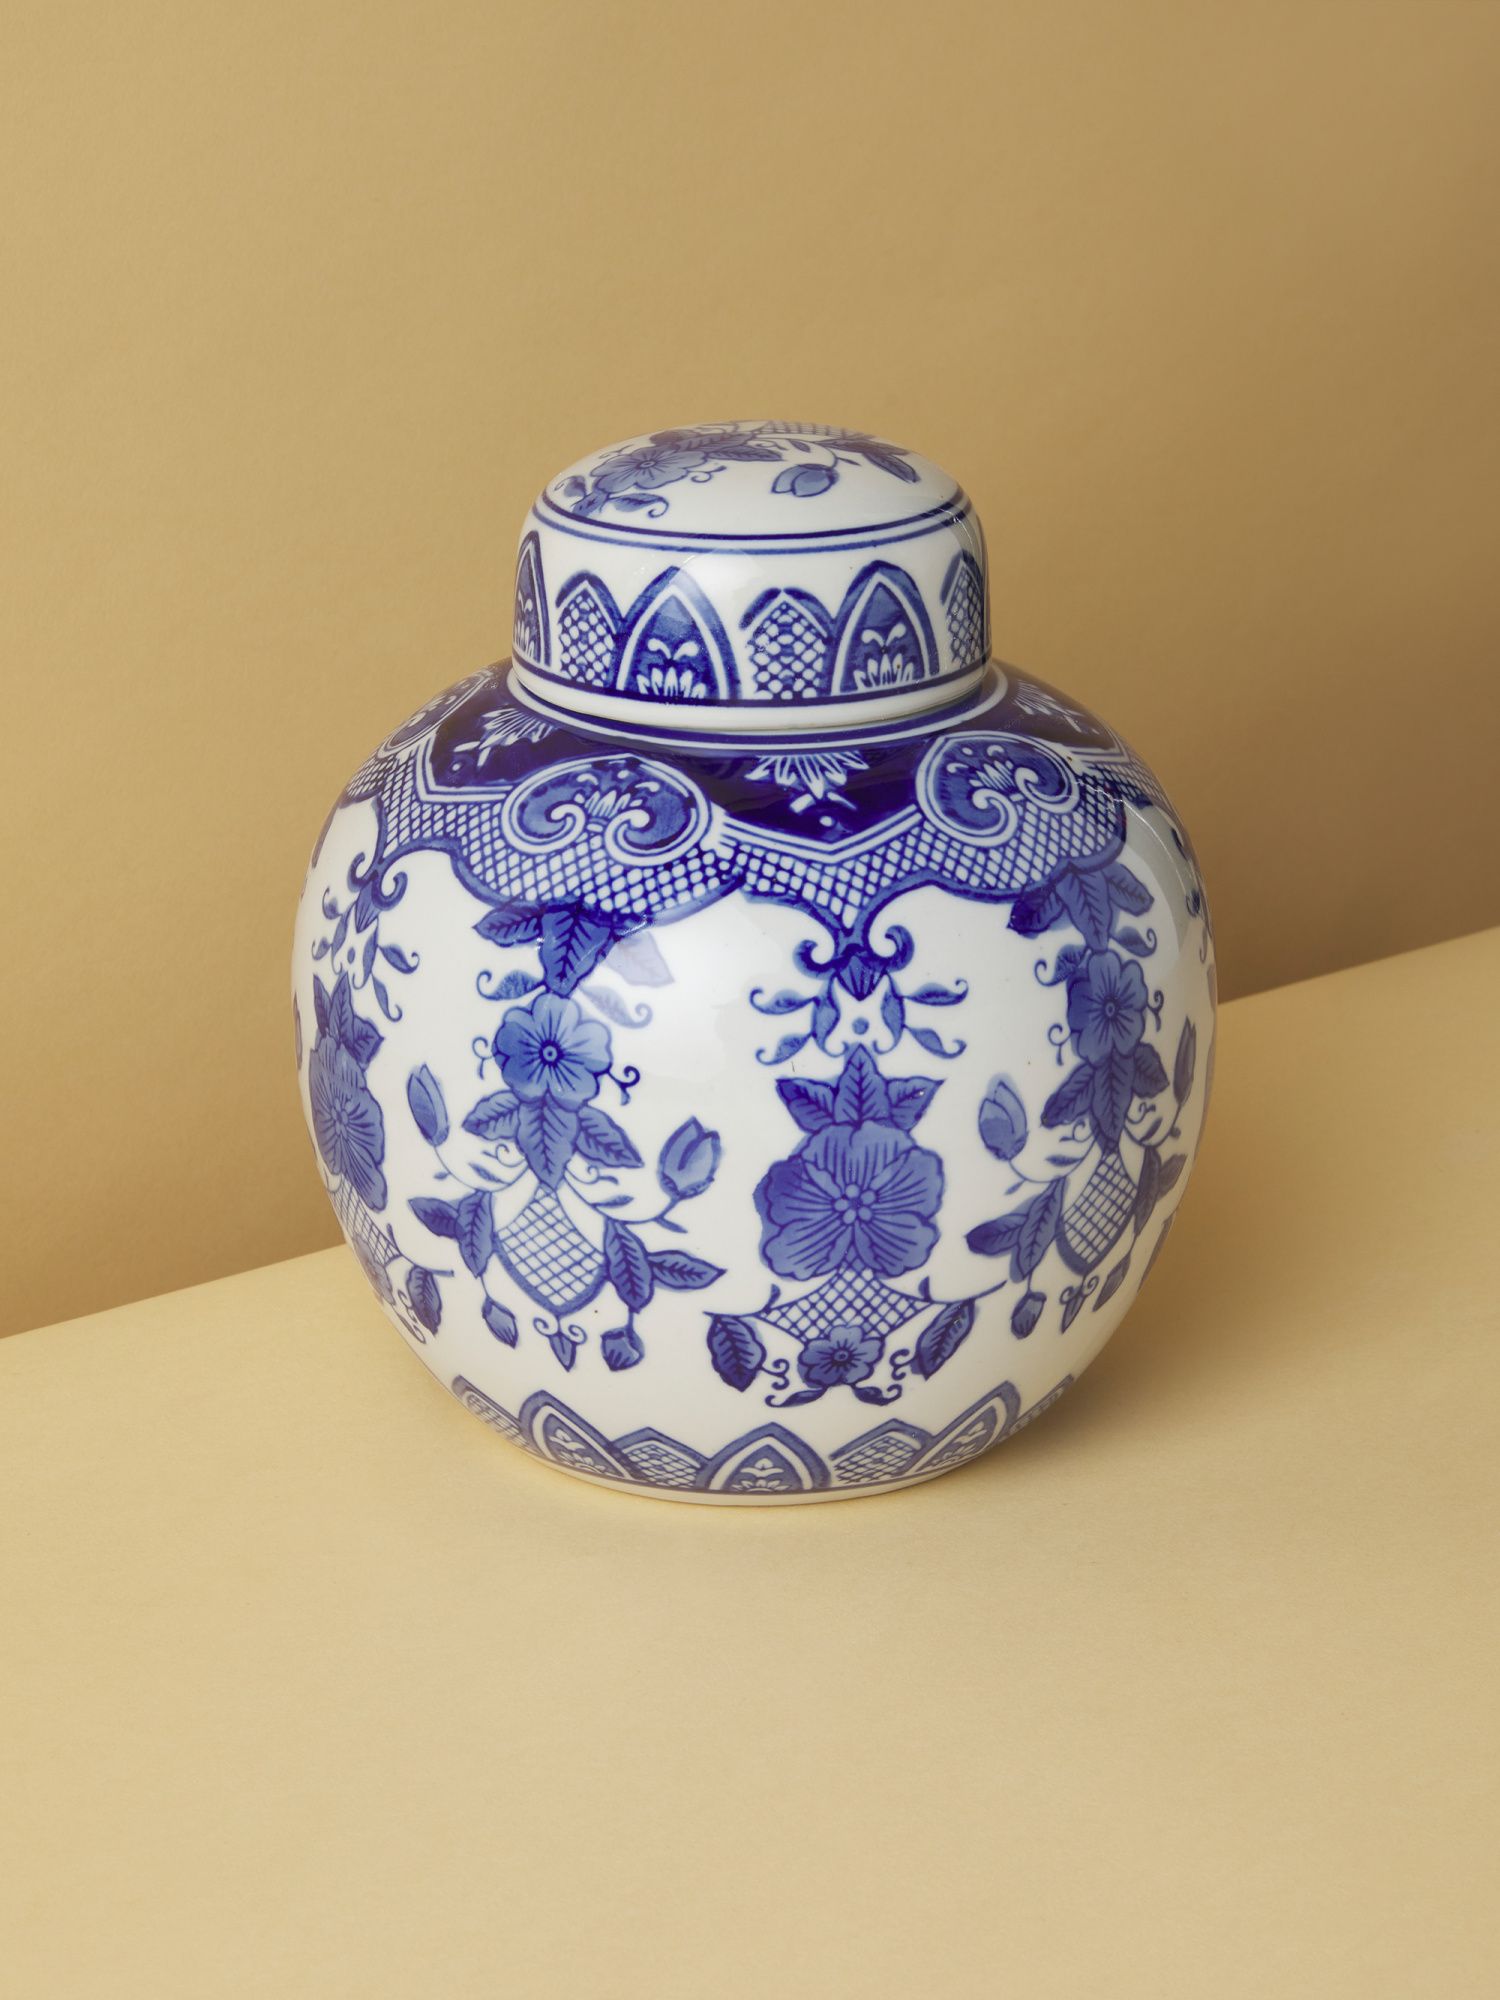 8in Ceramic Chinoiserie Vase With Lid | Decorative Objects | HomeGoods | HomeGoods